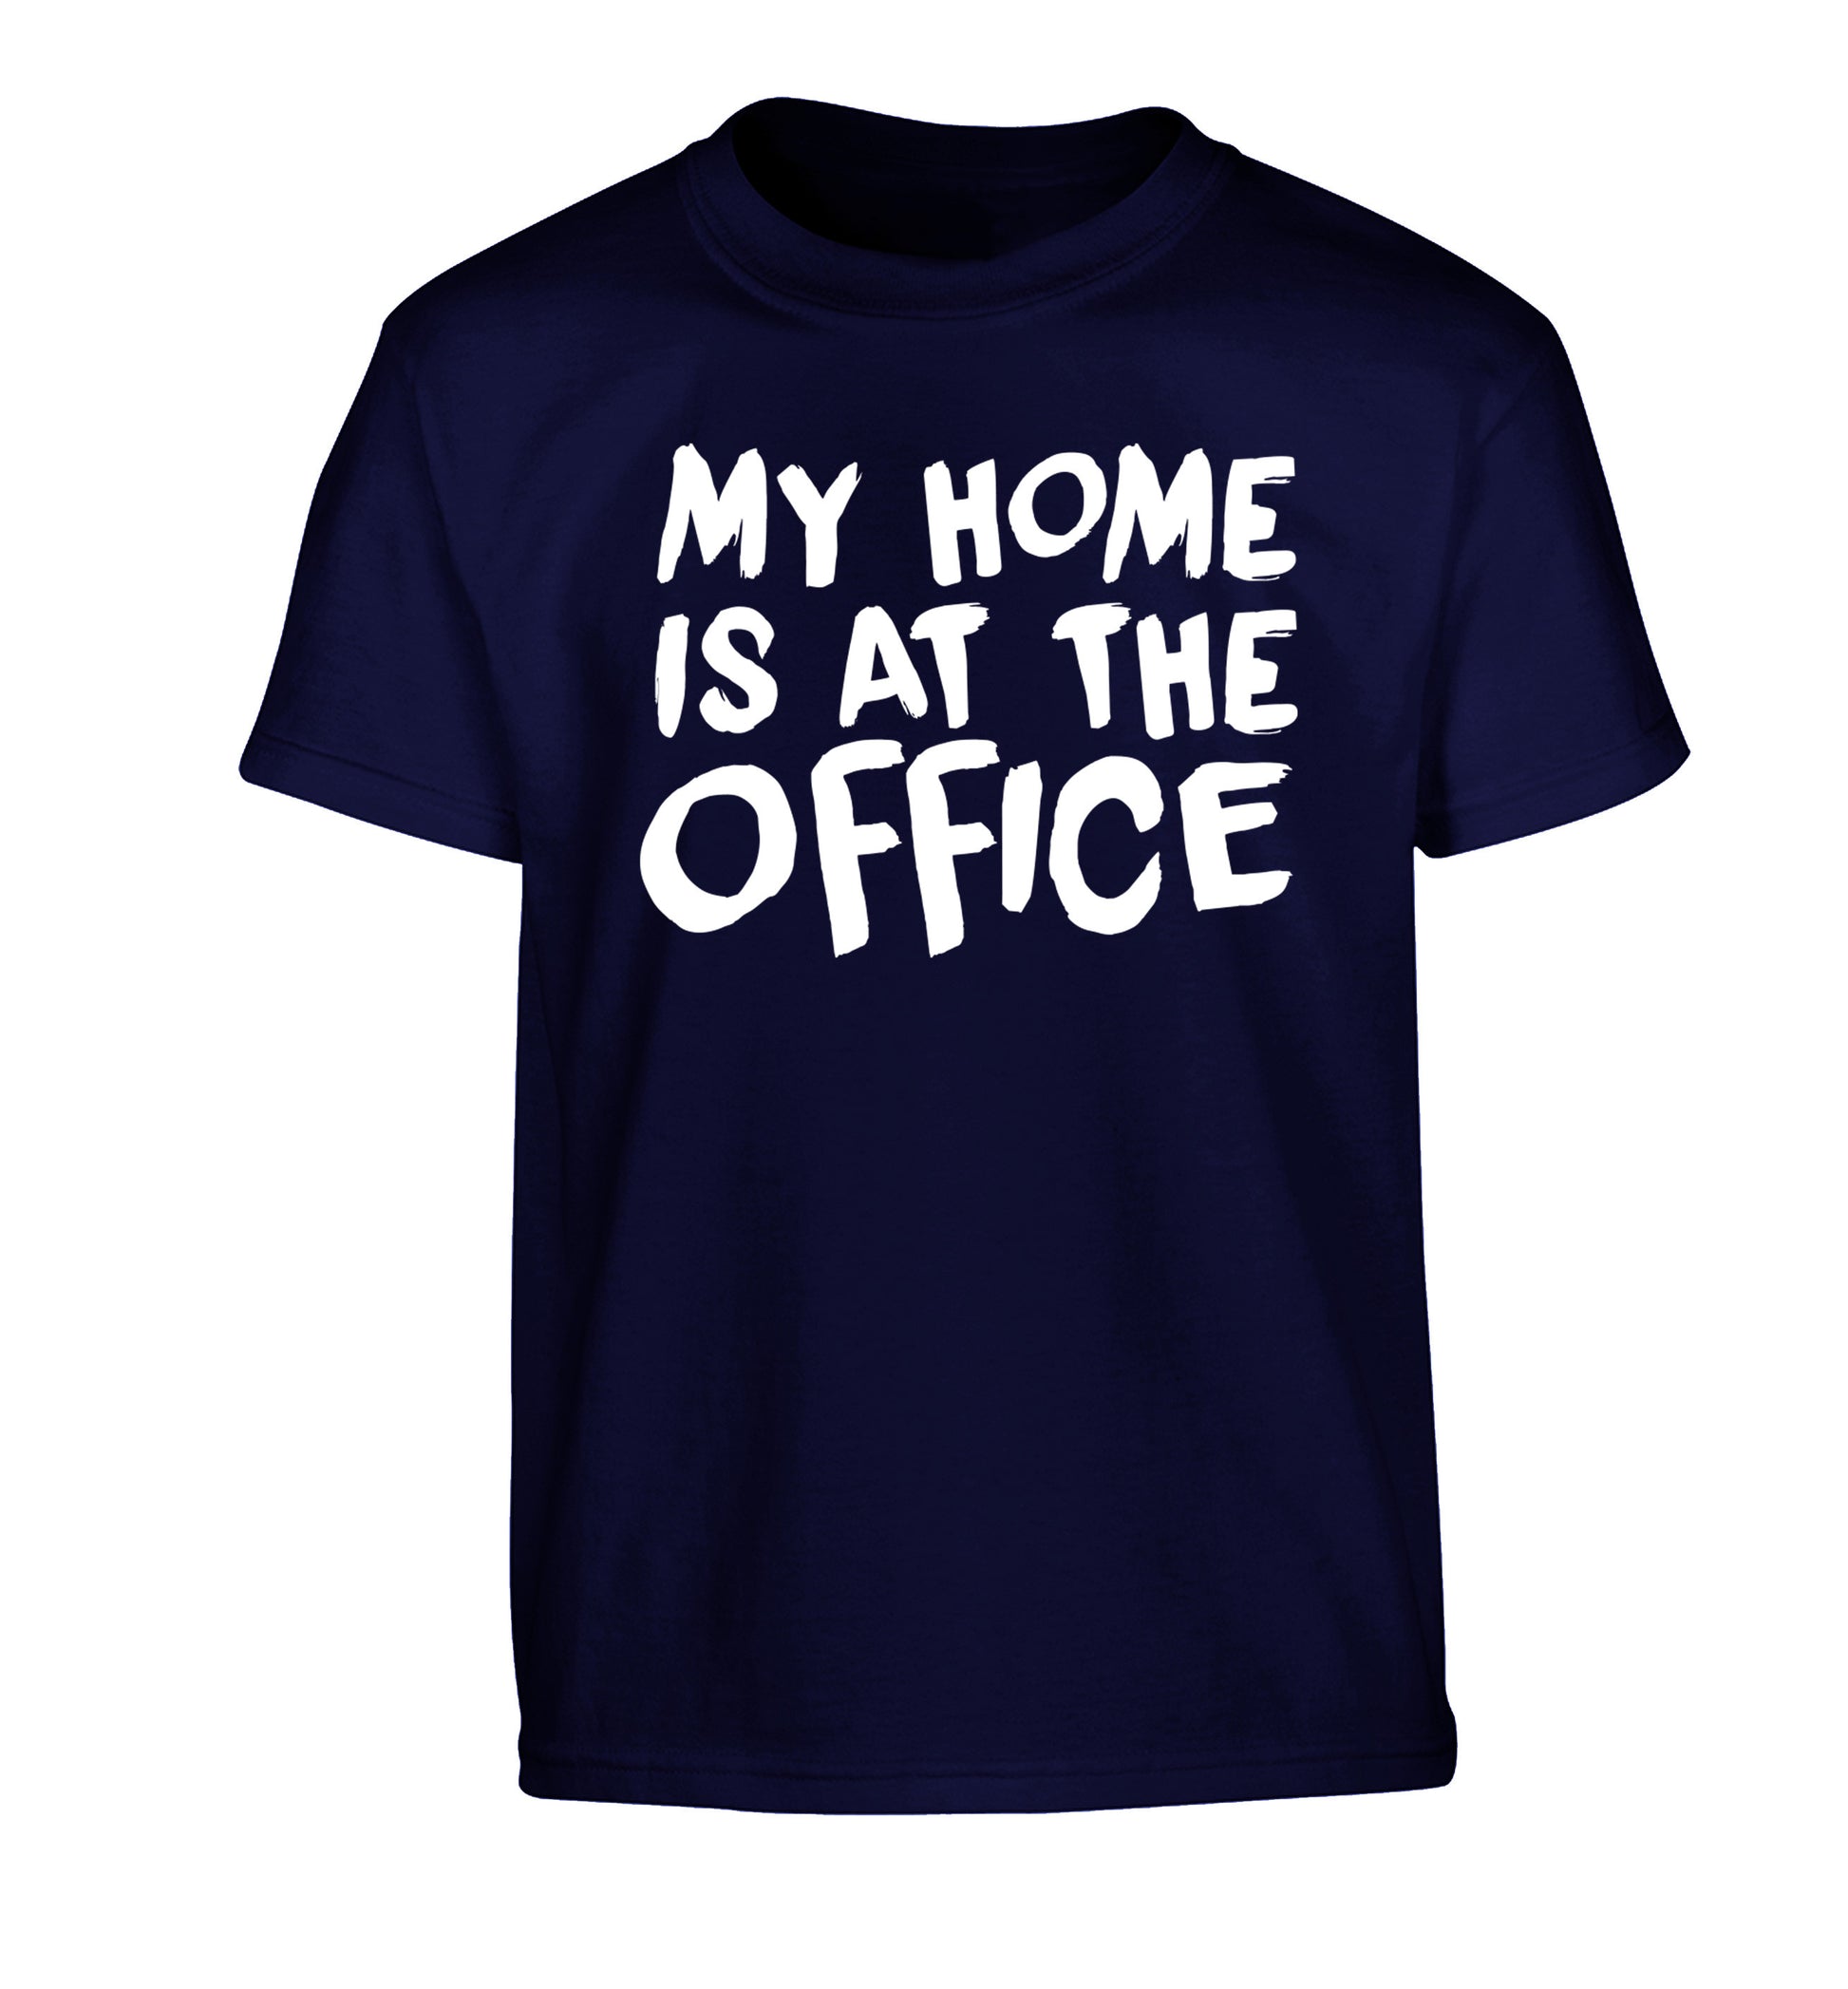 My home is at the office Children's navy Tshirt 12-14 Years